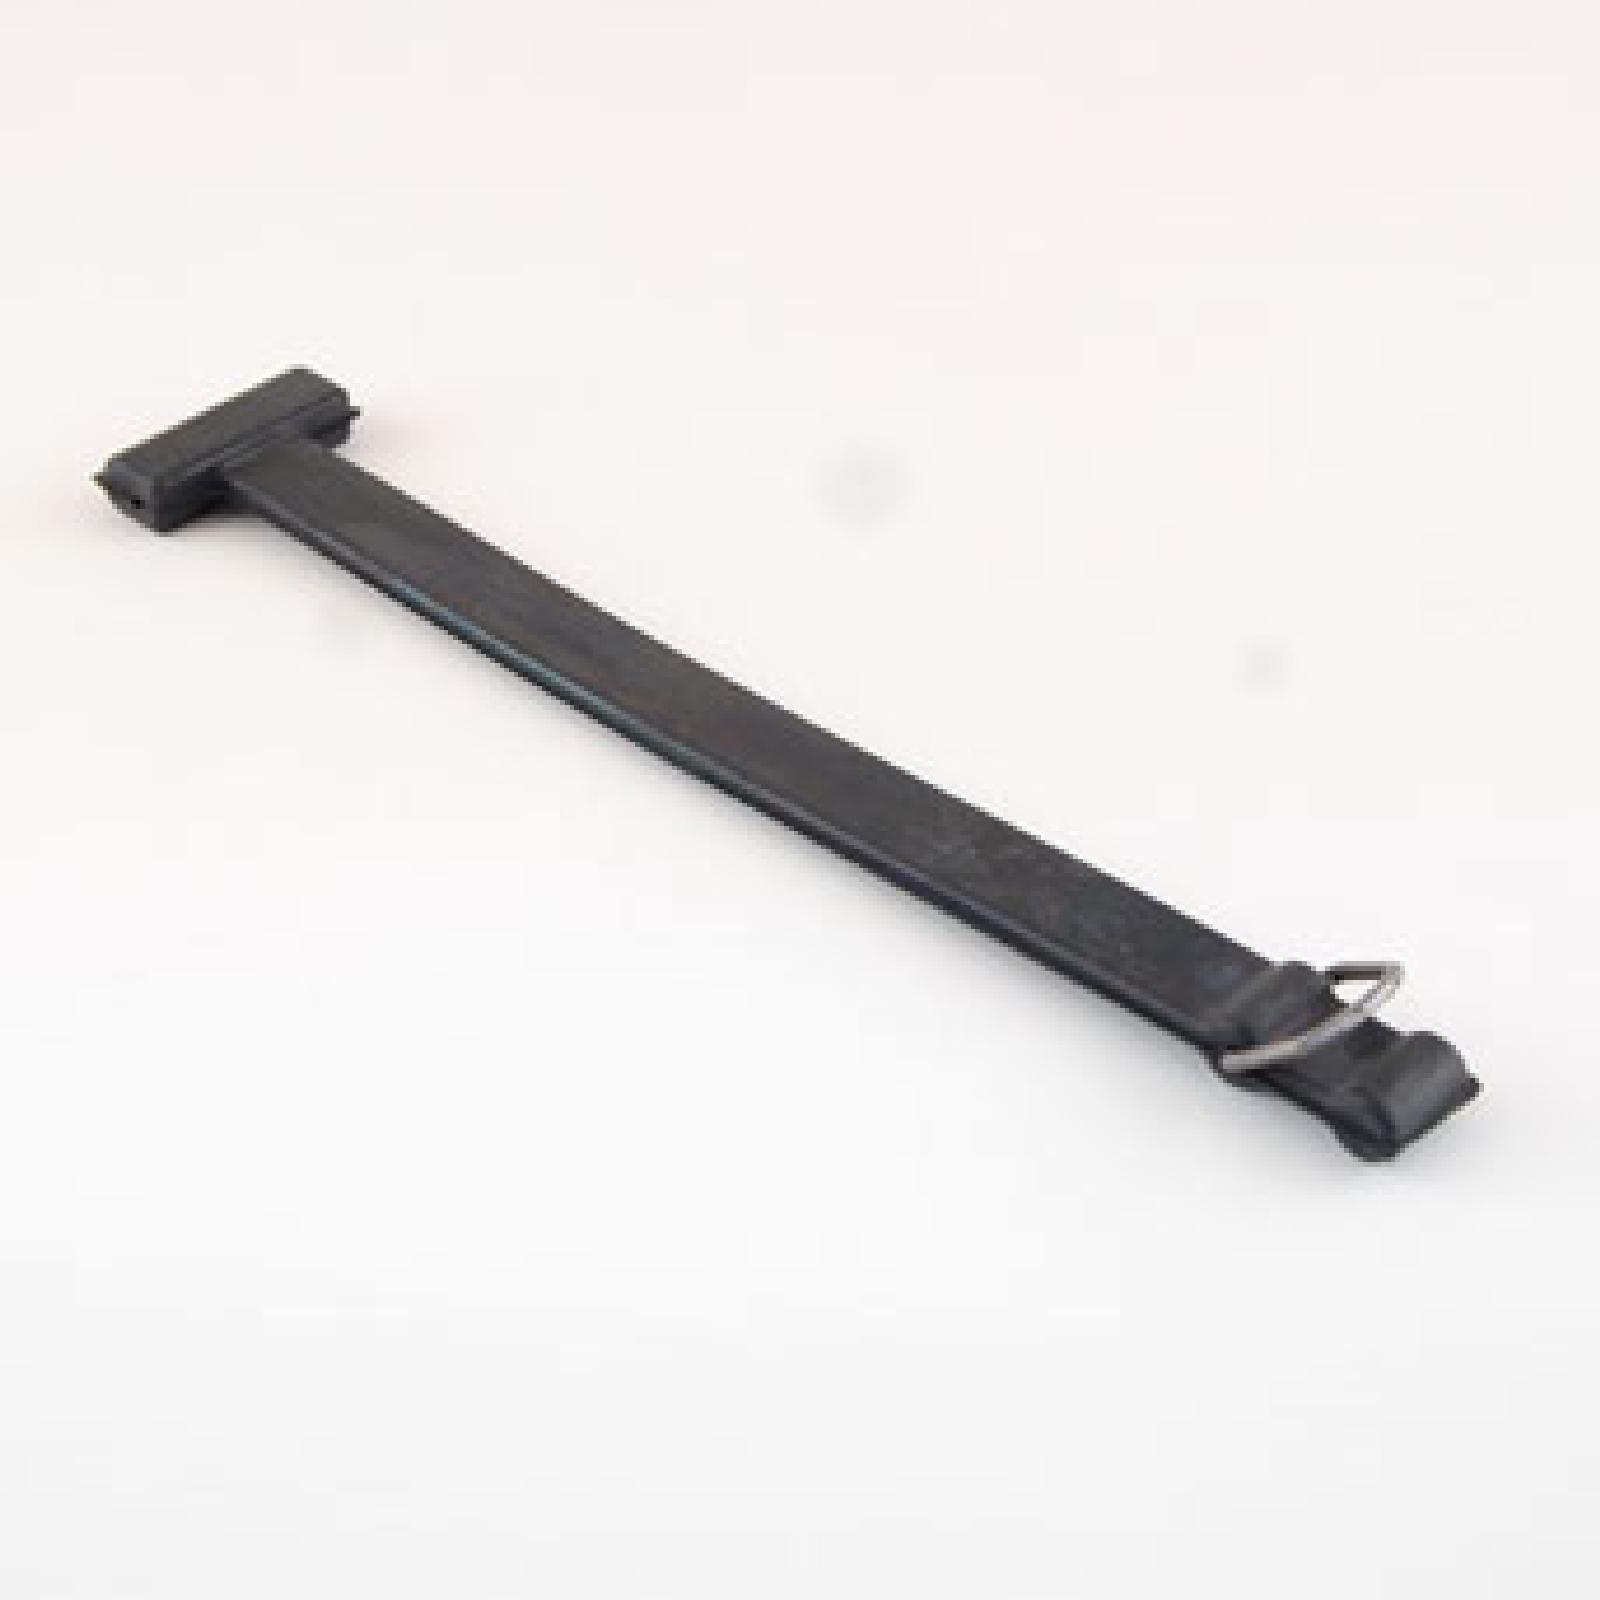 STRAP BAT RETAINER part# 723-3064 by MTD - Click Image to Close